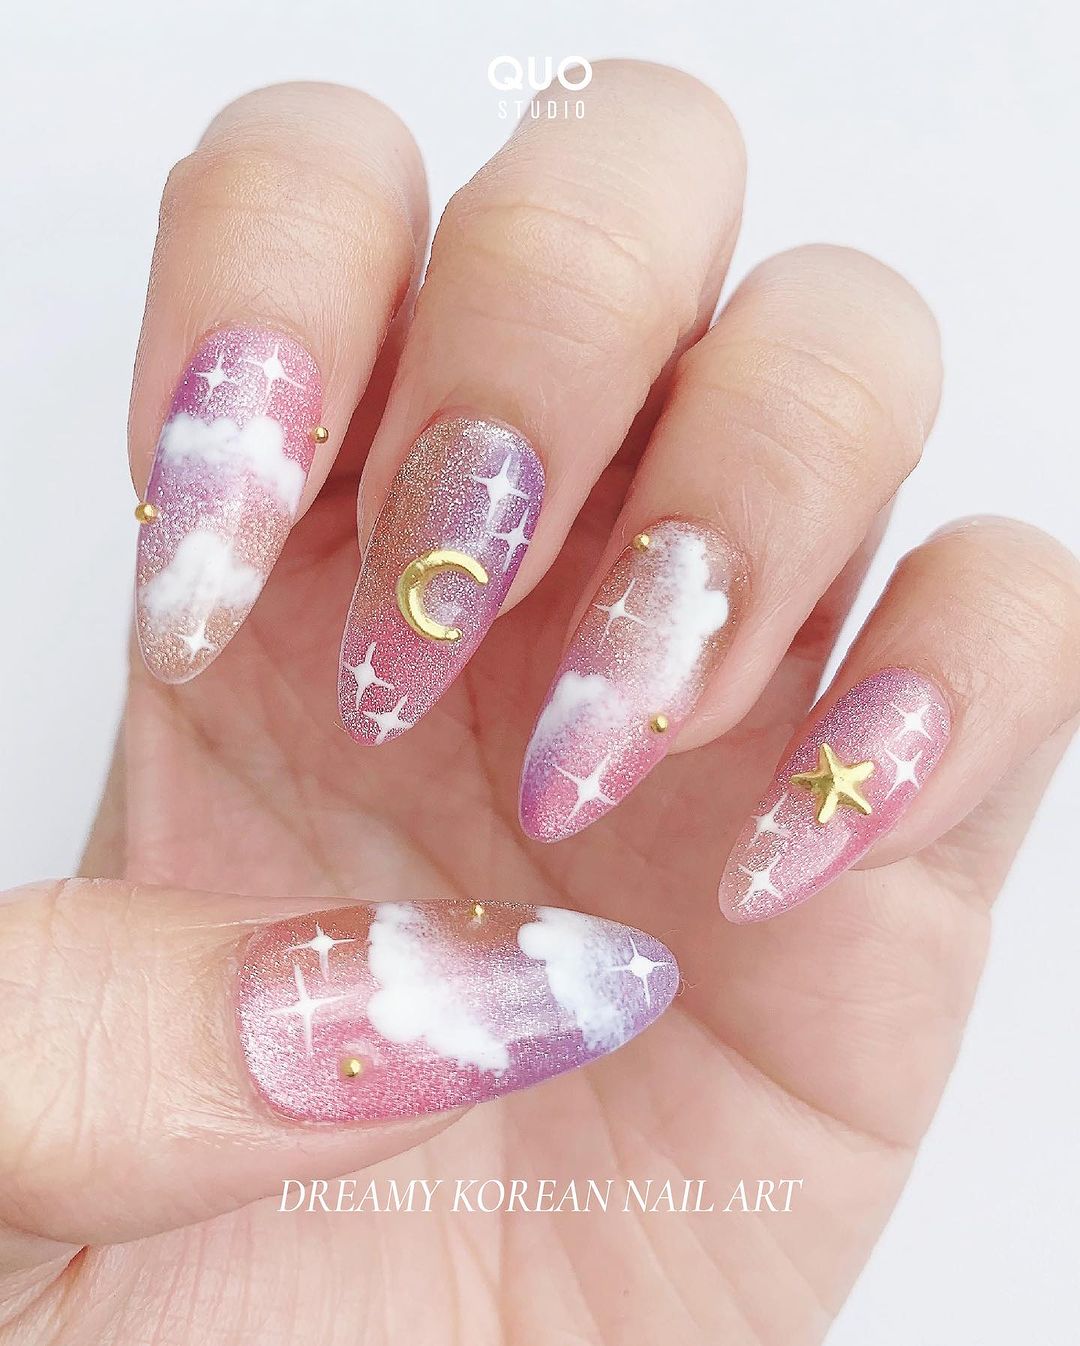 cute korean nails inspired by the evening sky